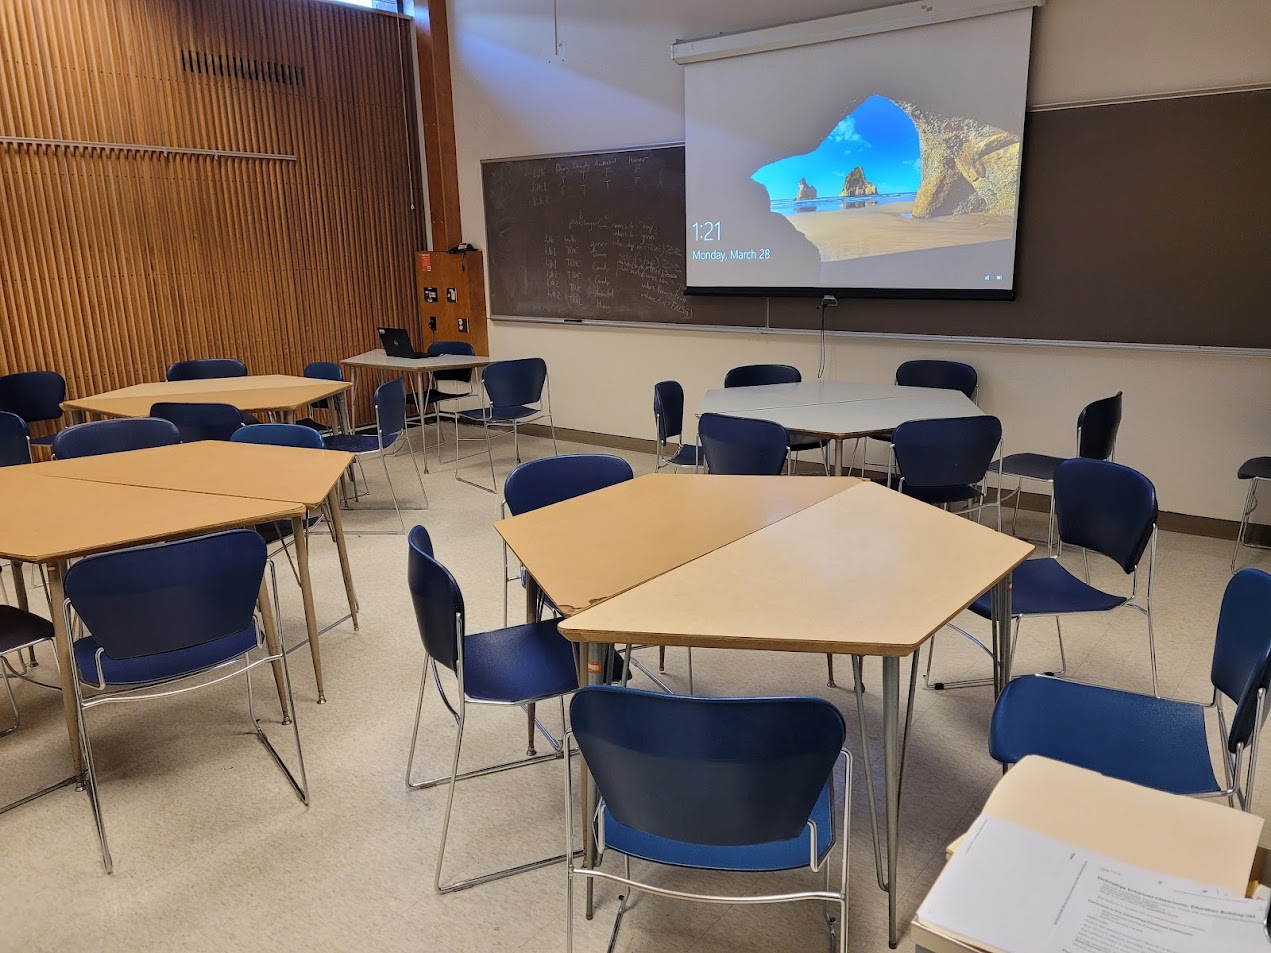 A view of the classroom with moveable tables and chairs, projection screen, and chalk board.